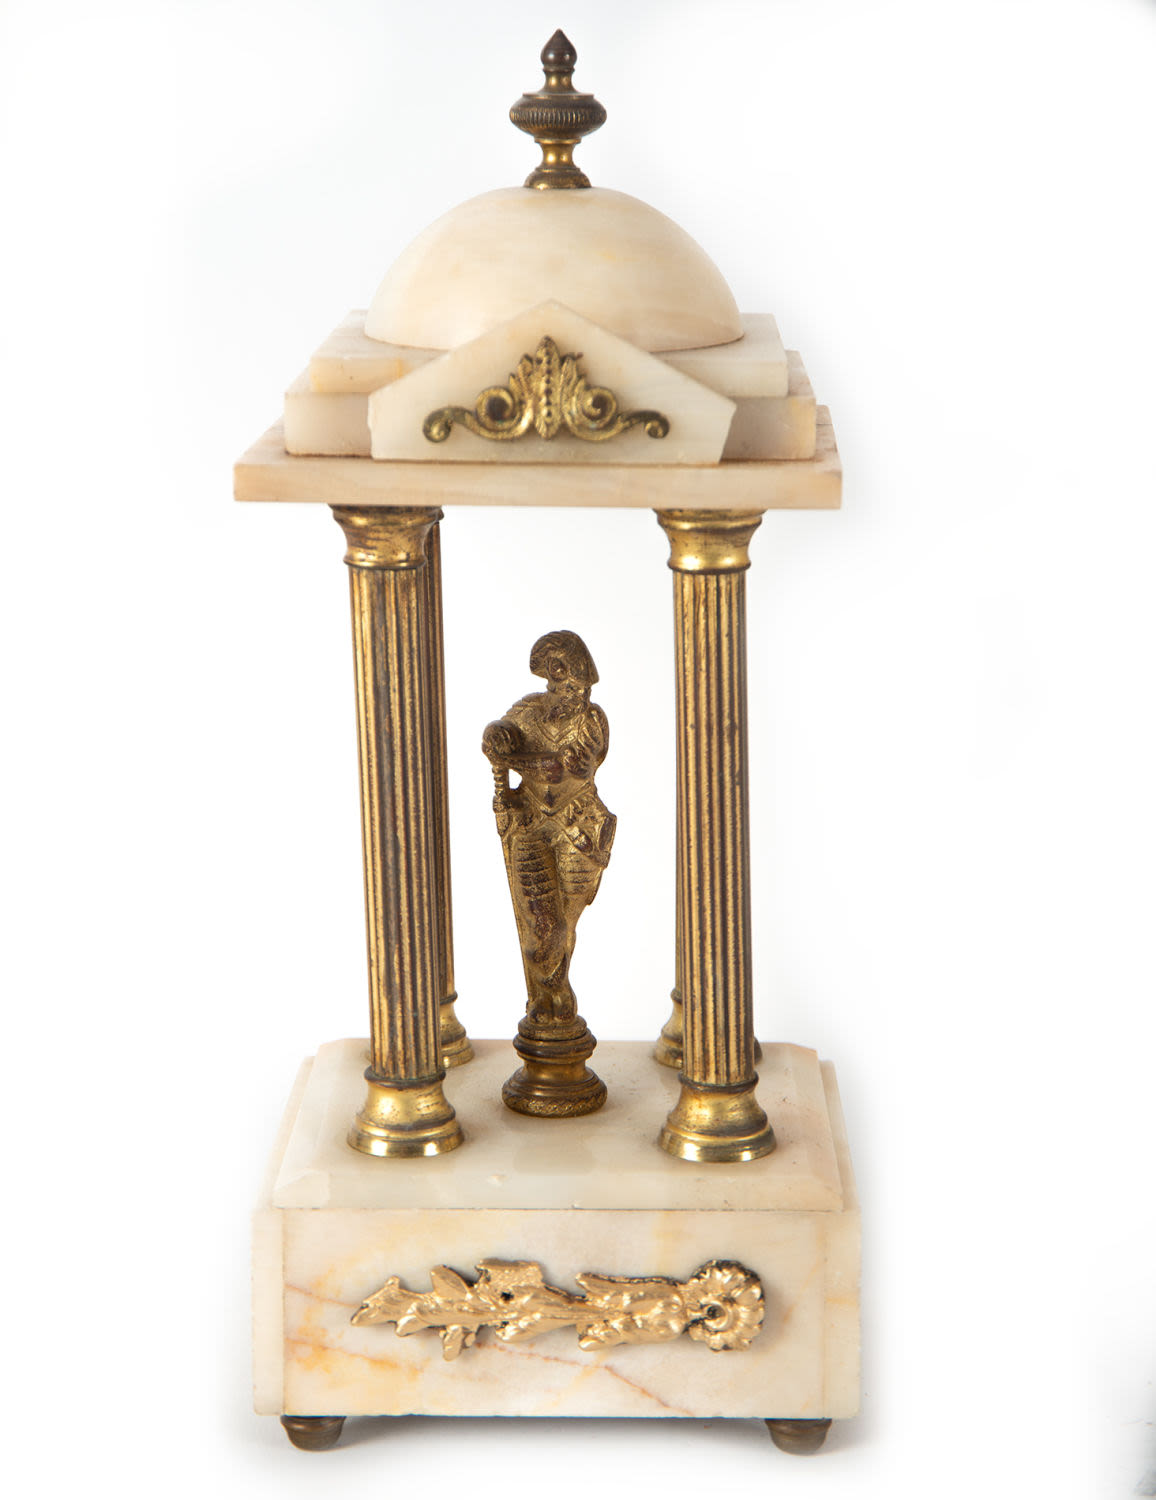 Neoclassical garniture in alabaster with temples and figures in gilt bronze - Image 5 of 8